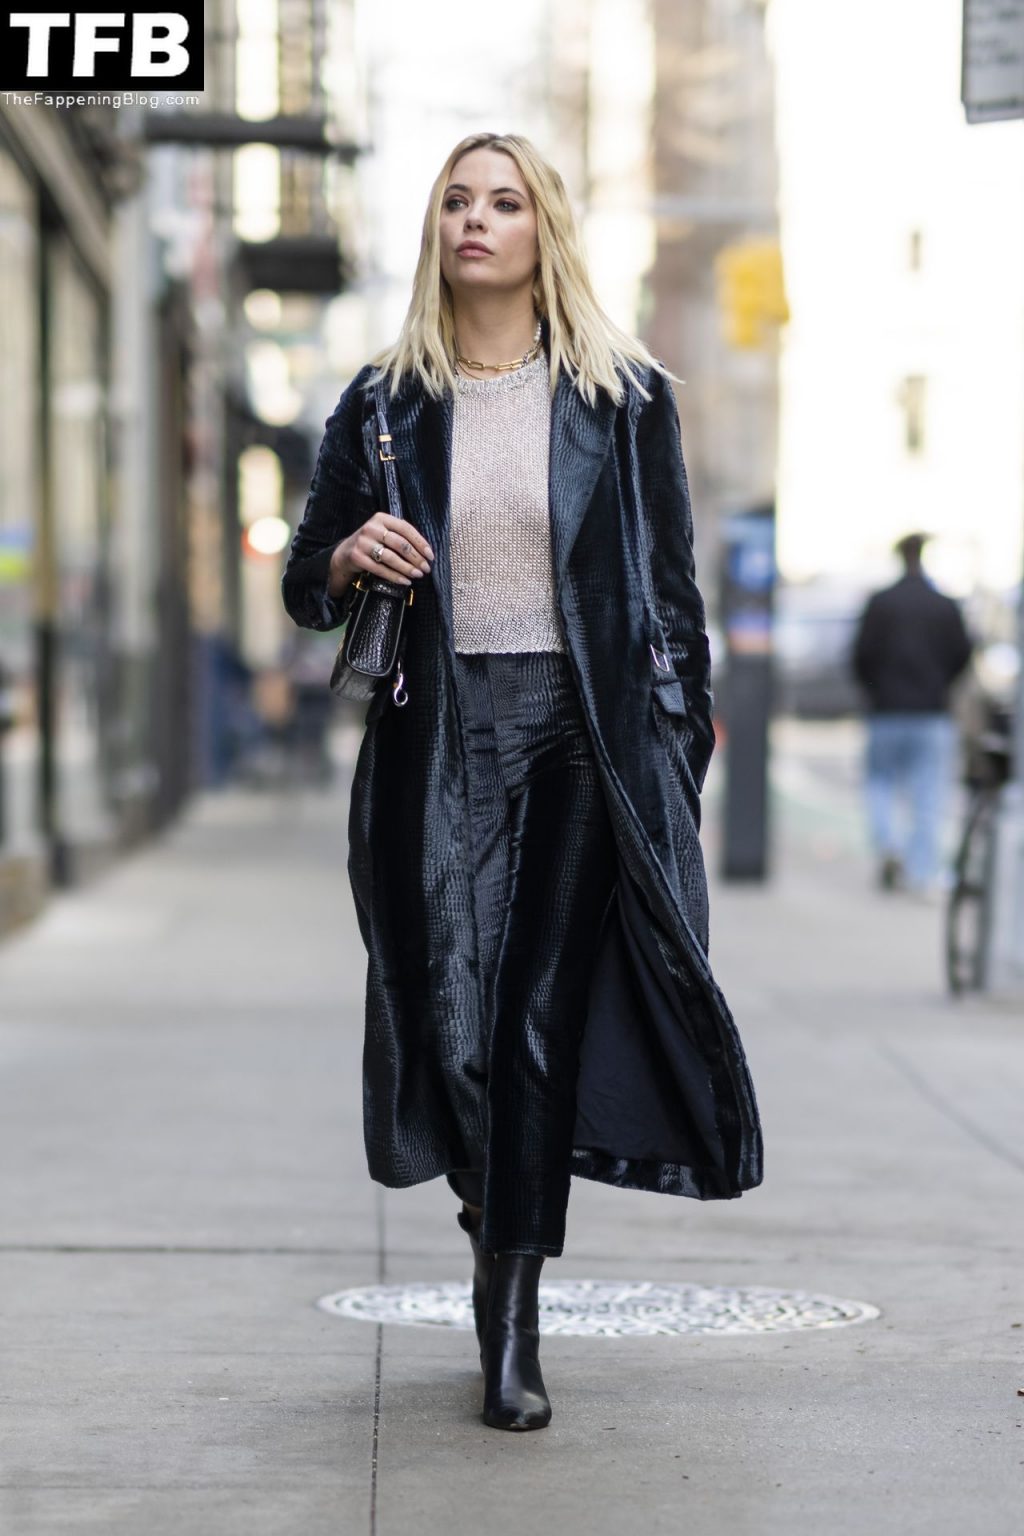 Ashley Benson Sexy The Fappening Blog 6 1024x1536 - Braless Ashley Benson Looks Stylish While Heading to a Meeting in NYC (20 Photos)